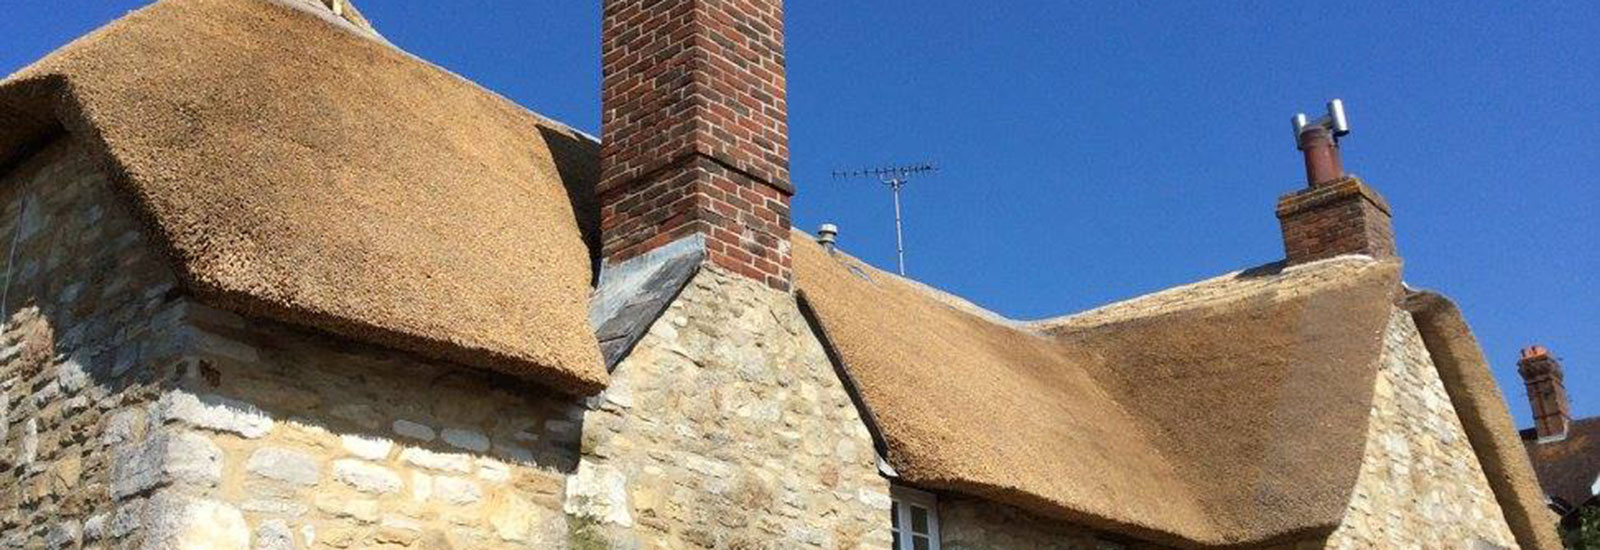 Mike Howes Thatching Dorset